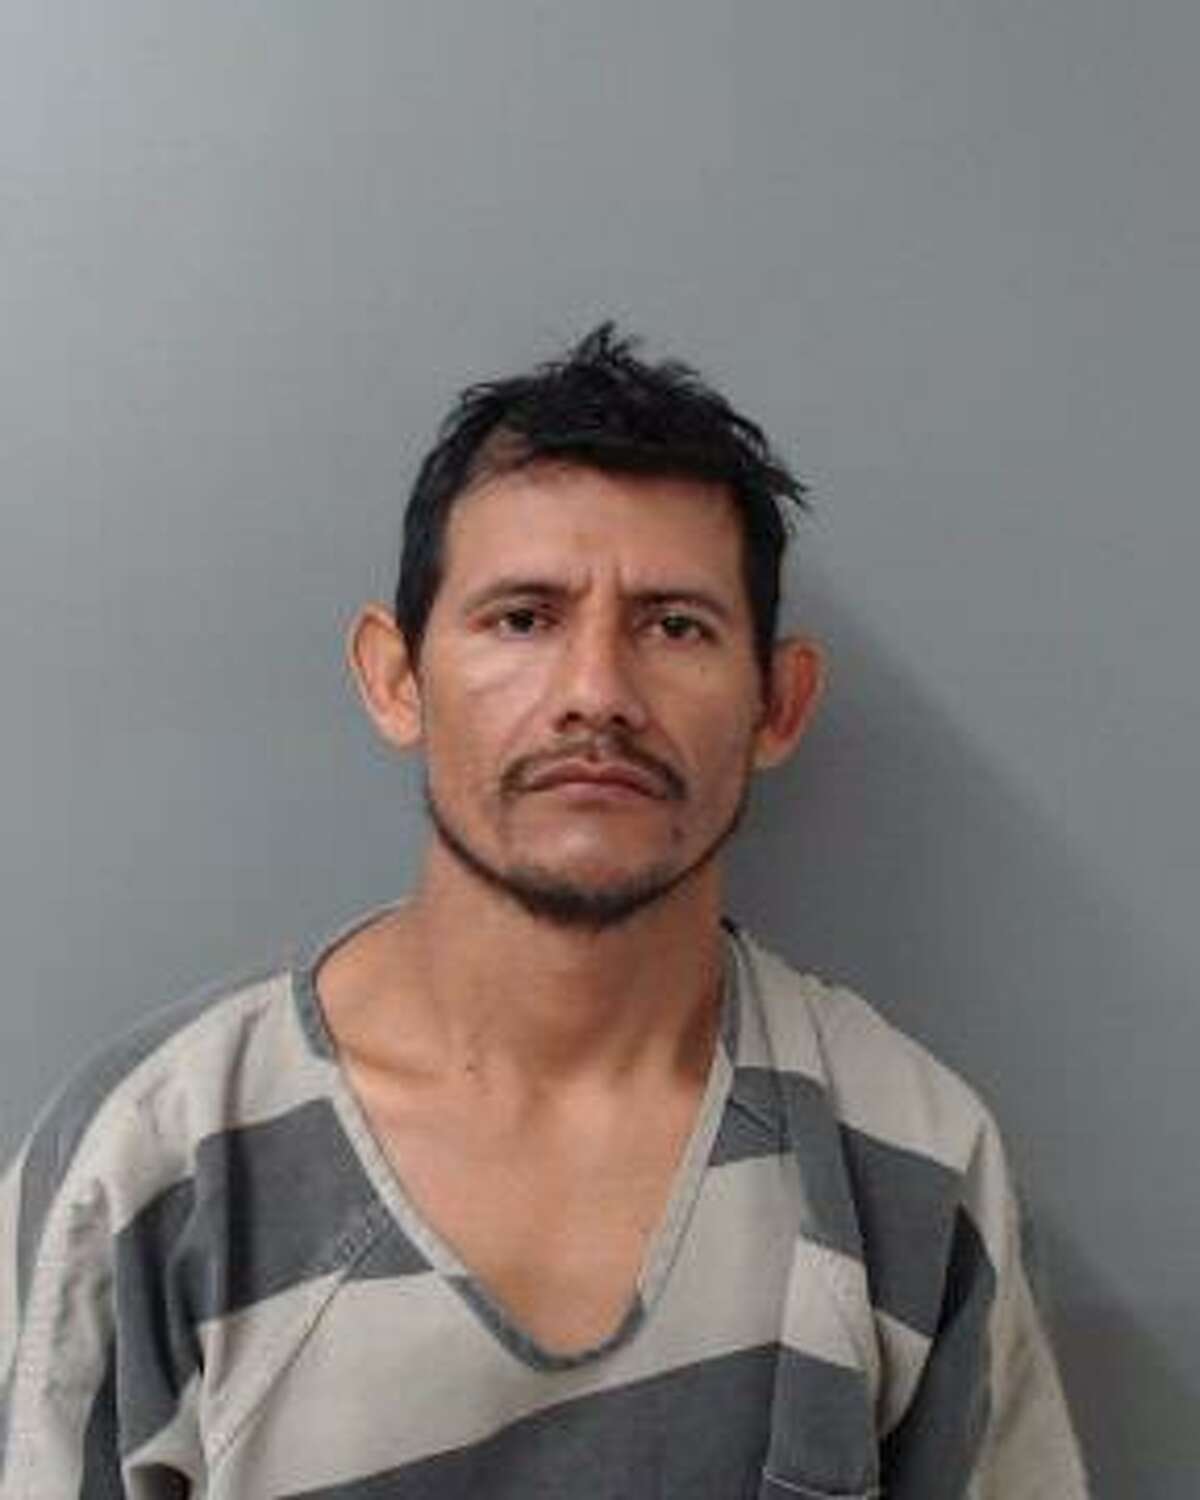 Alfonso Hernandez, 43, was charged with two counts of aggravated assault with a deadly weapon.